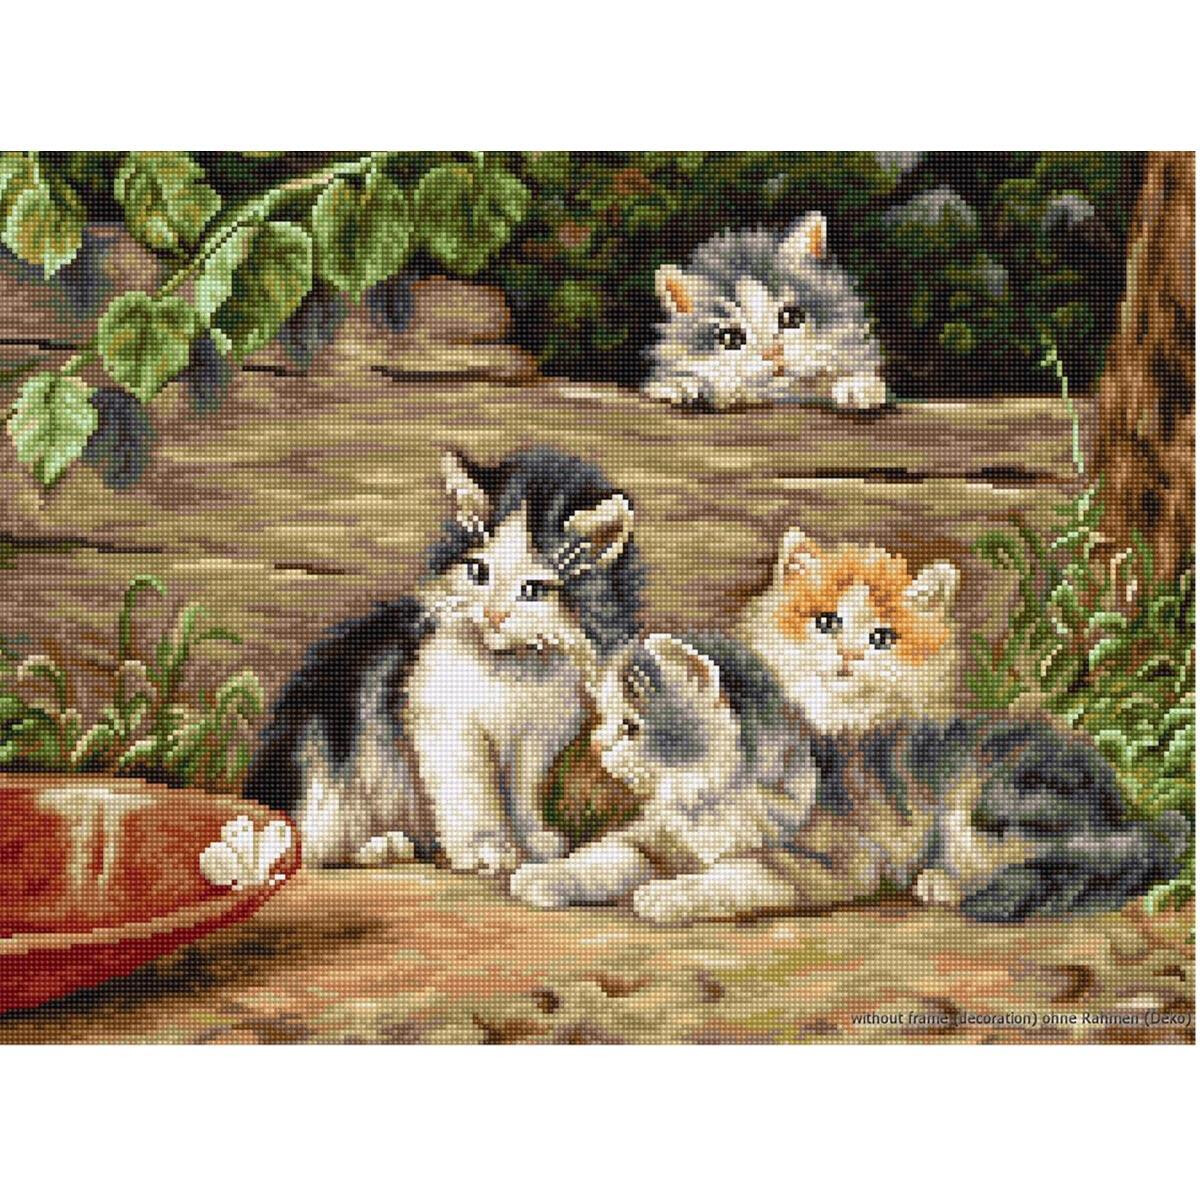 An illustration of four kittens outdoors next to a tree...